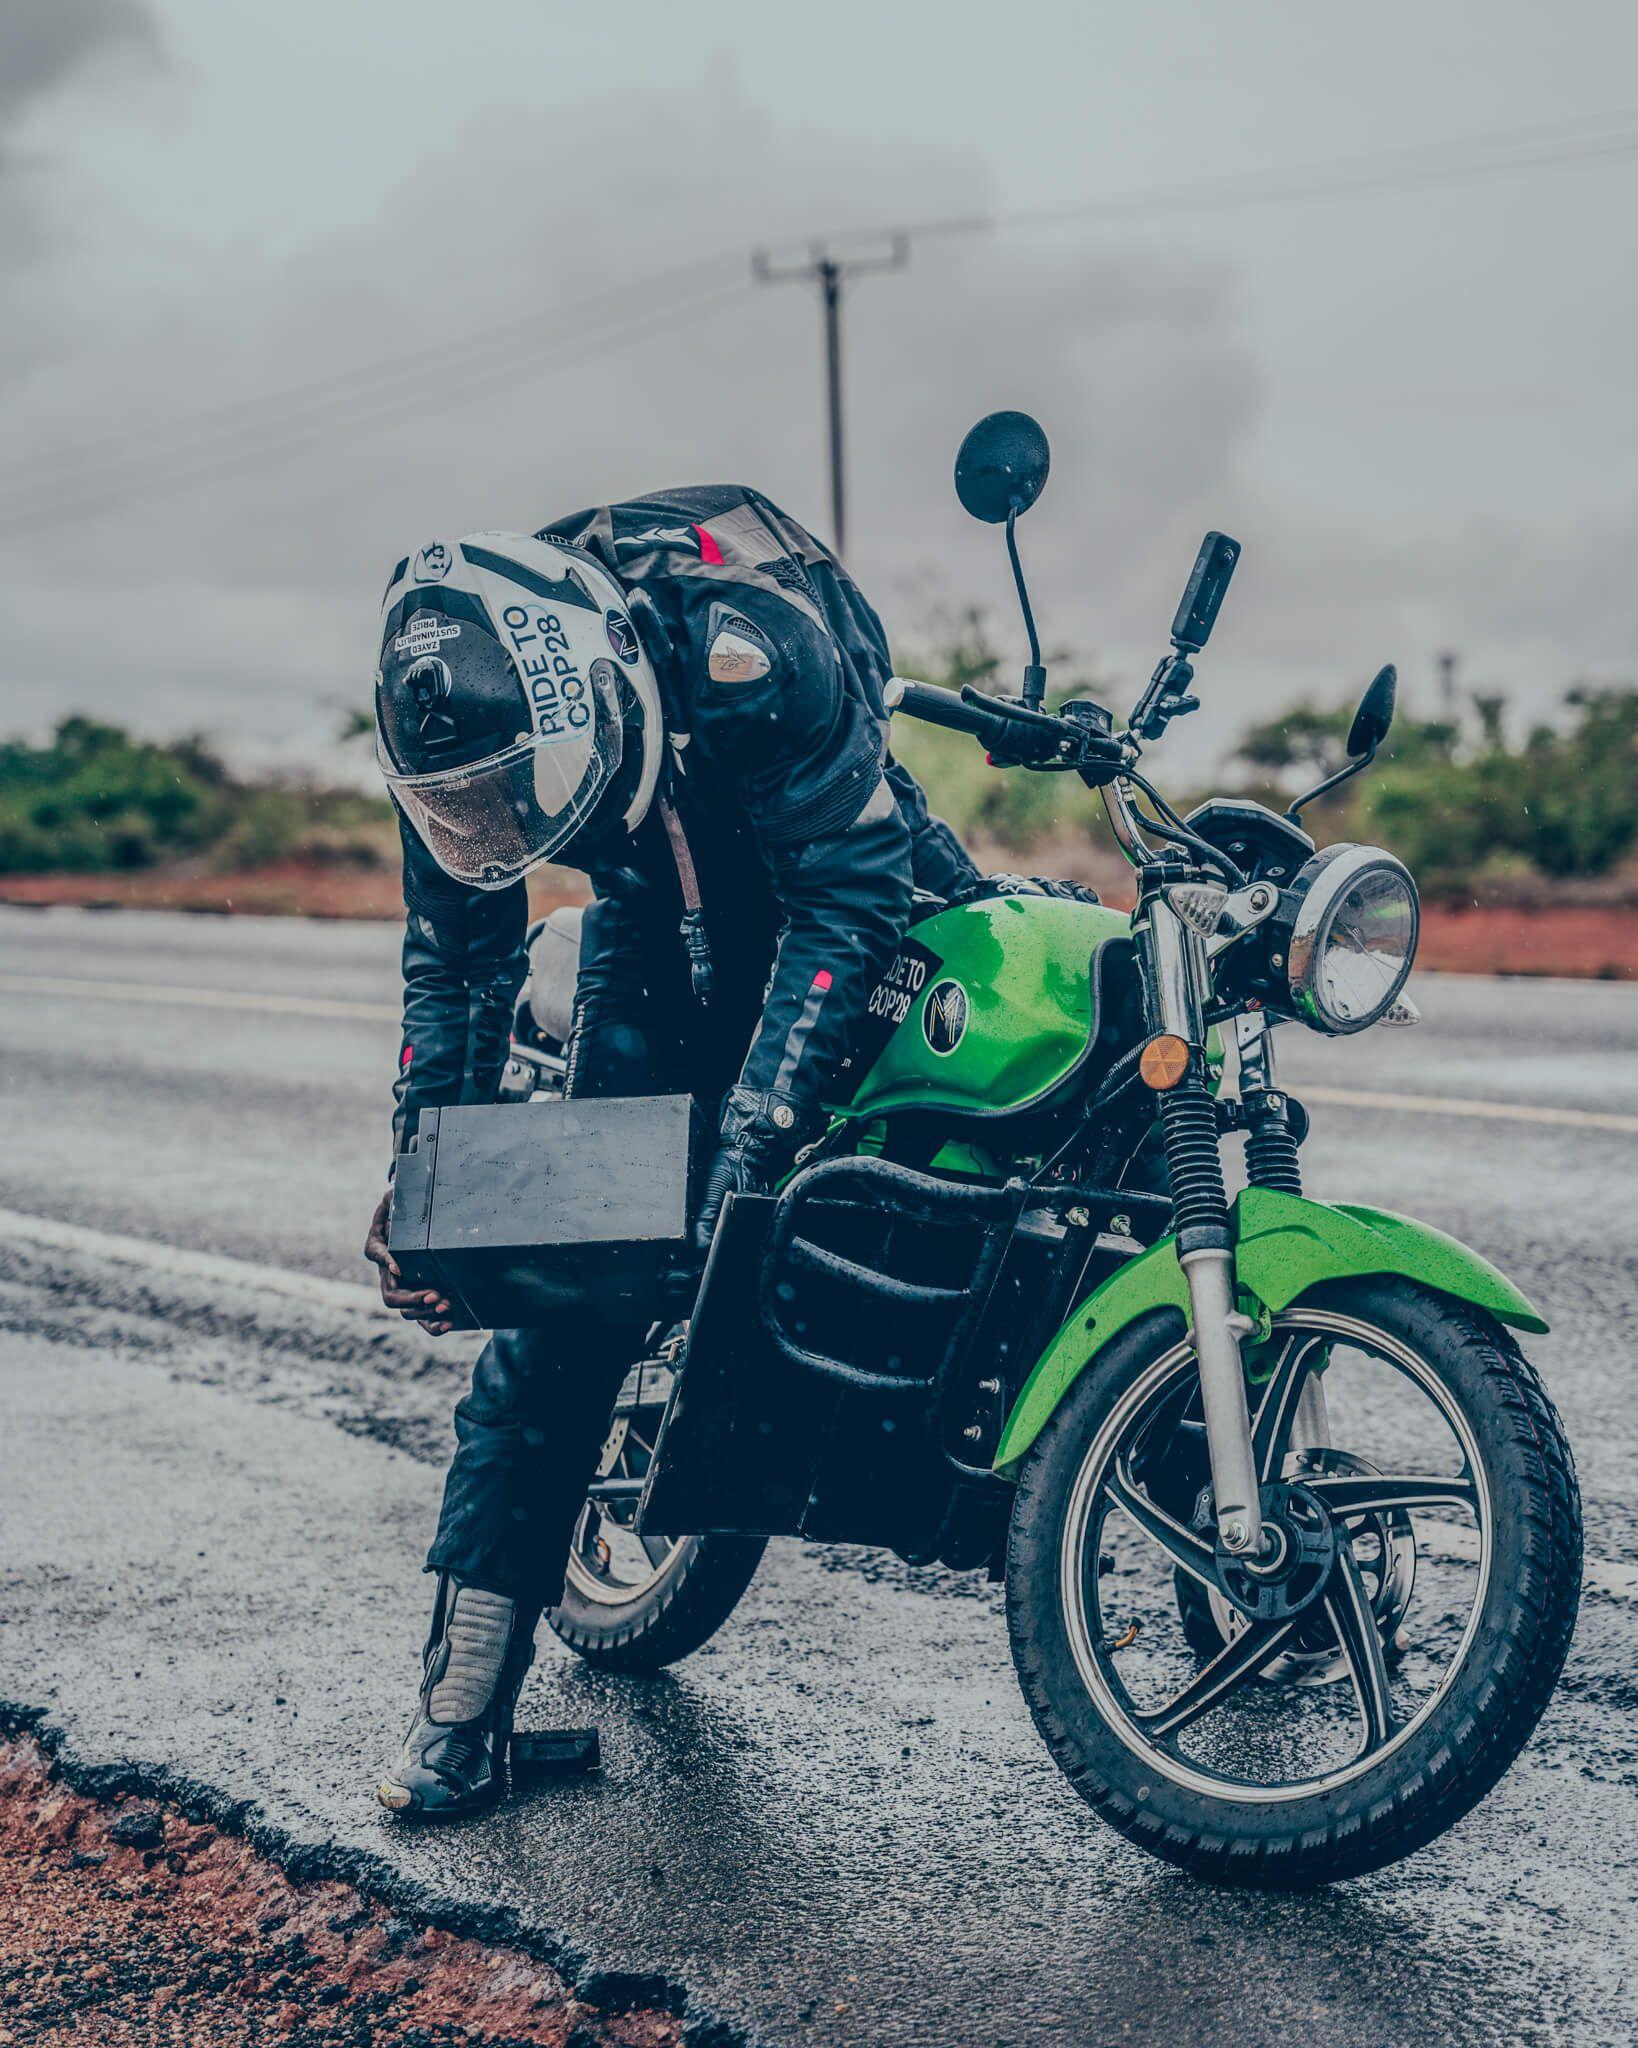 One of Mazi Mobility’s main goals is to assuage consumer anxiety over battery usage in electric vehicles. No charge? No problem. Mazi Mobility’s ambulance service delivers fully charged electric batteries for motorcyclists in need.
Photo: Mazi Mobility